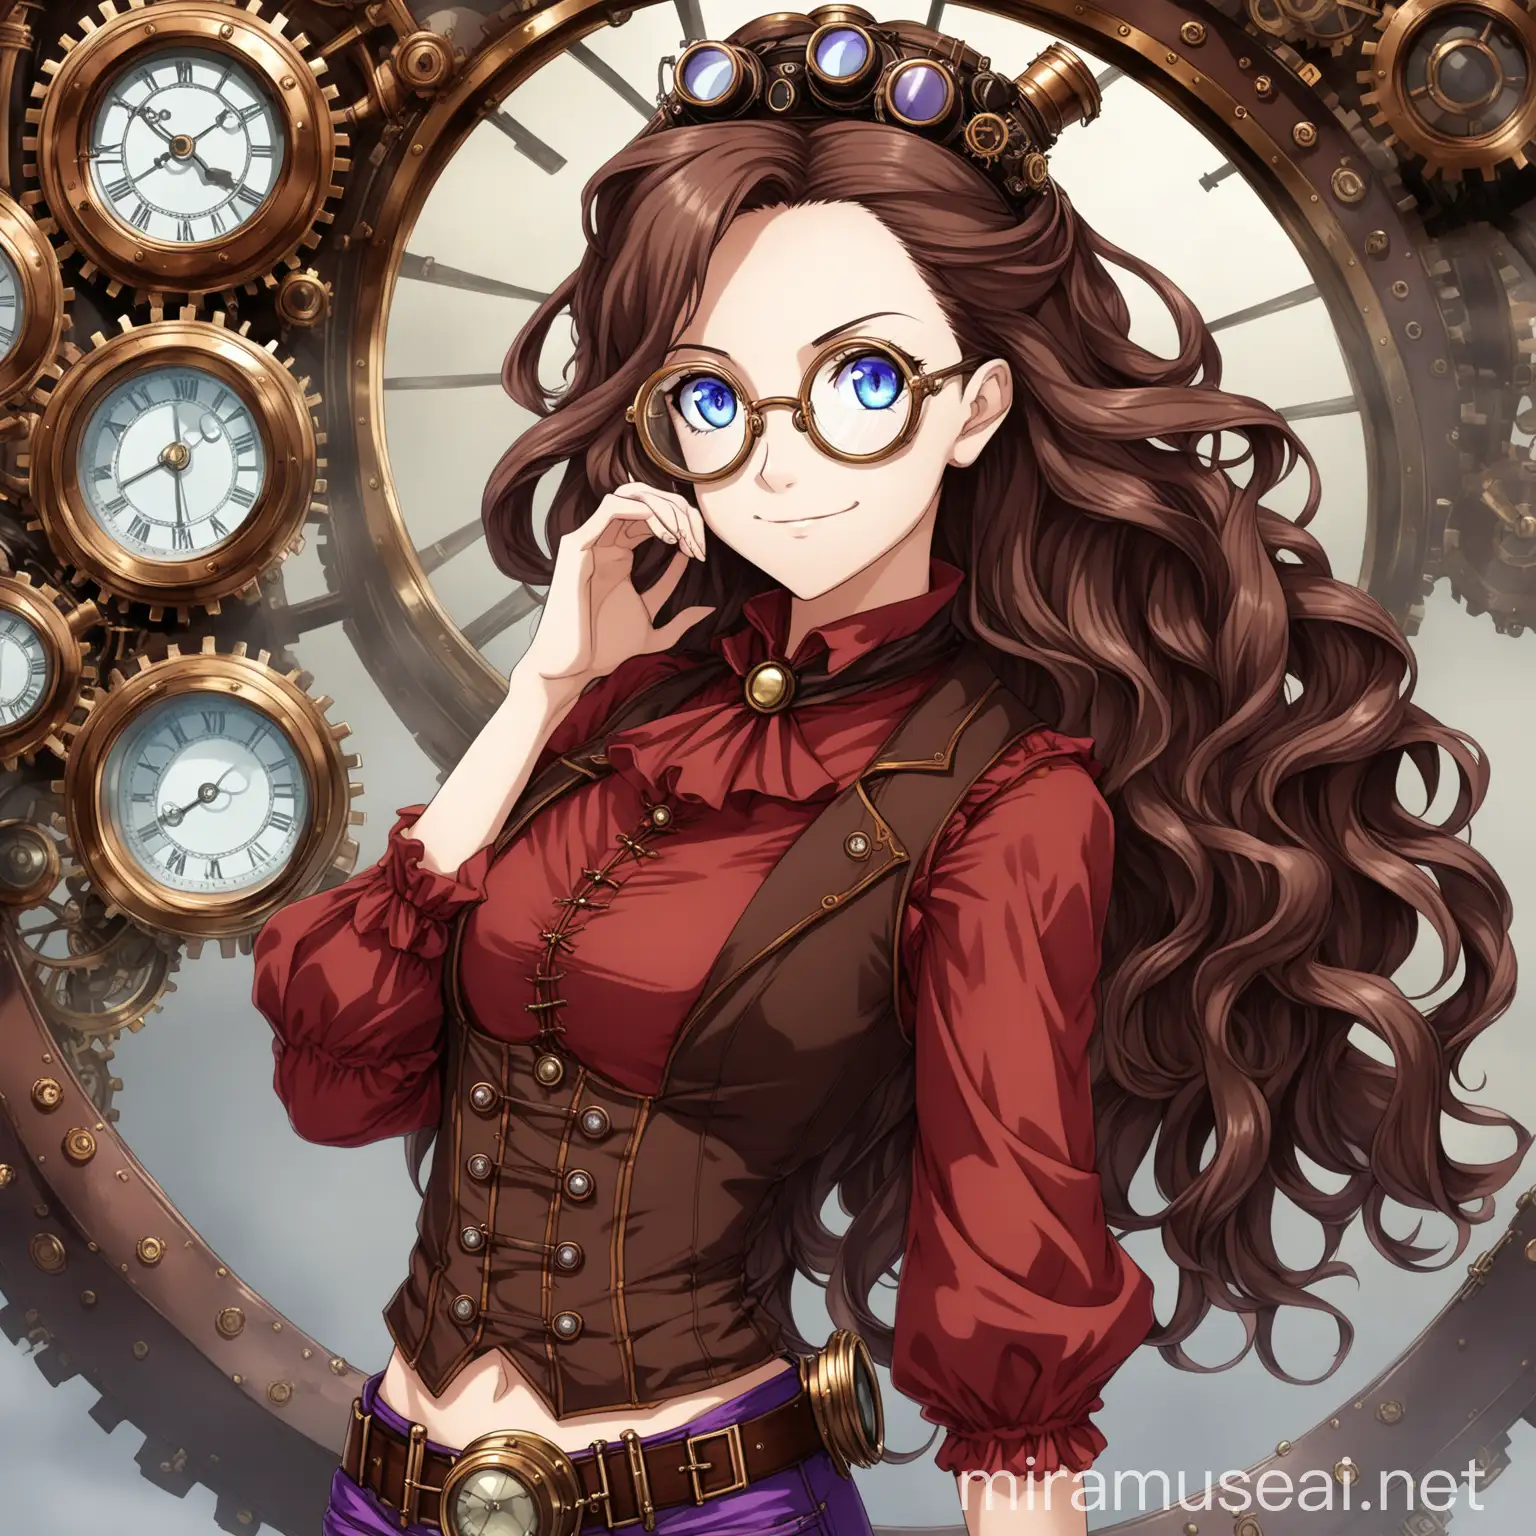 Visualize a slim steampunk woman with beautiful features and (((brown))), long wavy hair), dressed in  (red blouse closed at the top and open at the bottom bunched up showing her midriff, a short purple vest, purple steampunk pants), glasses with large lenses, blue eyes, look of defiant smile, in anime style